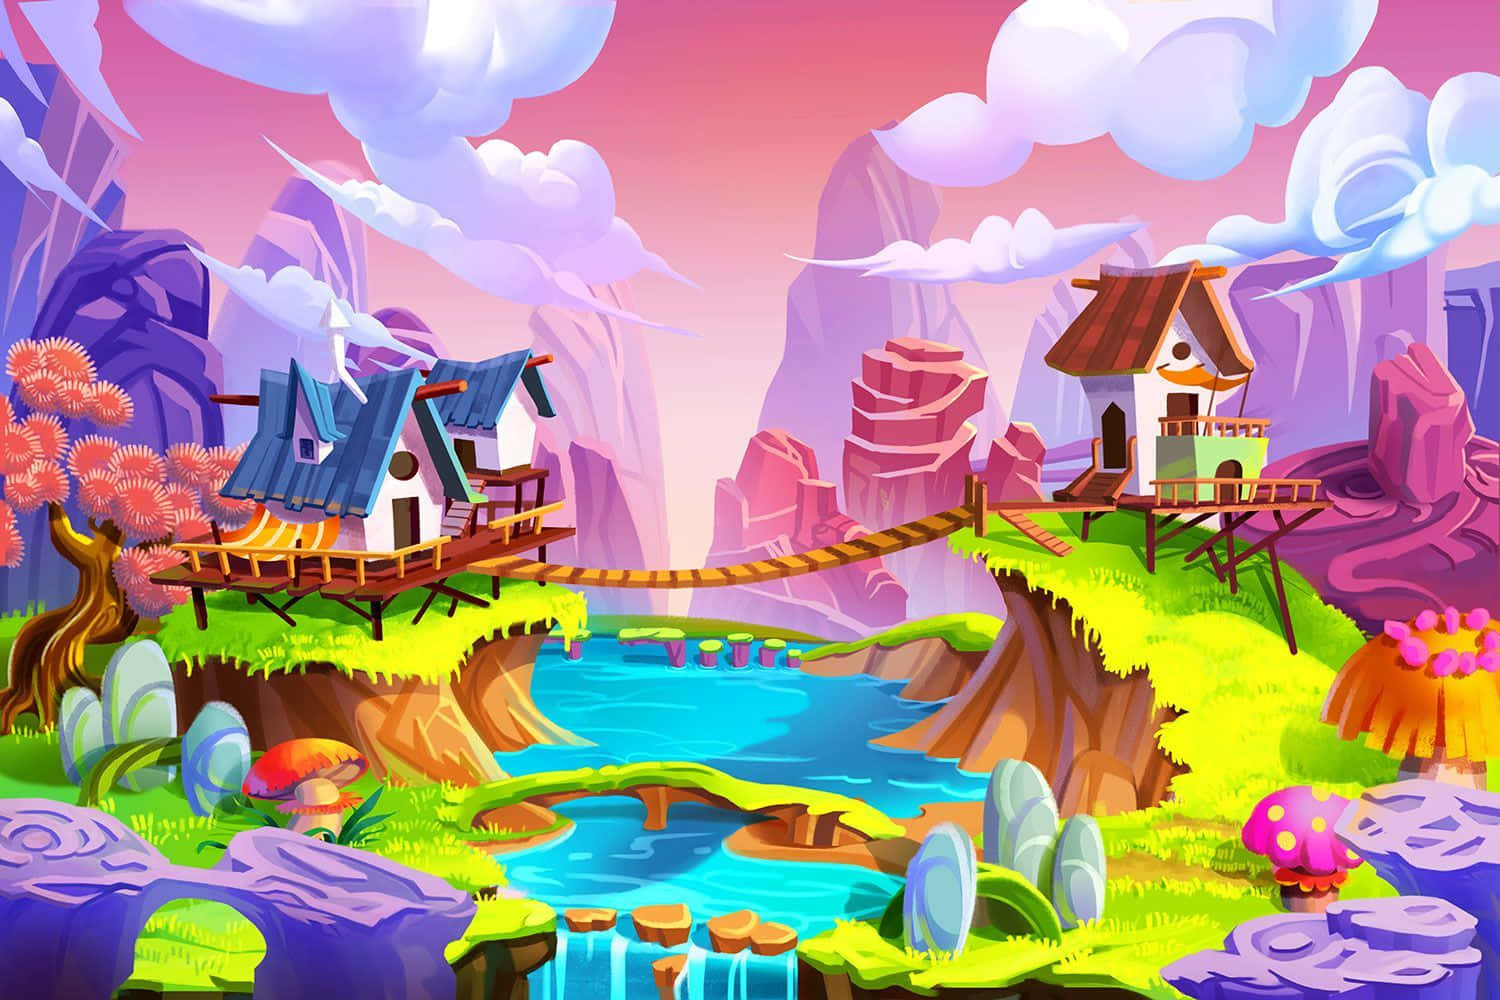 Magical candy dreams come true in Candy Land! Wallpaper